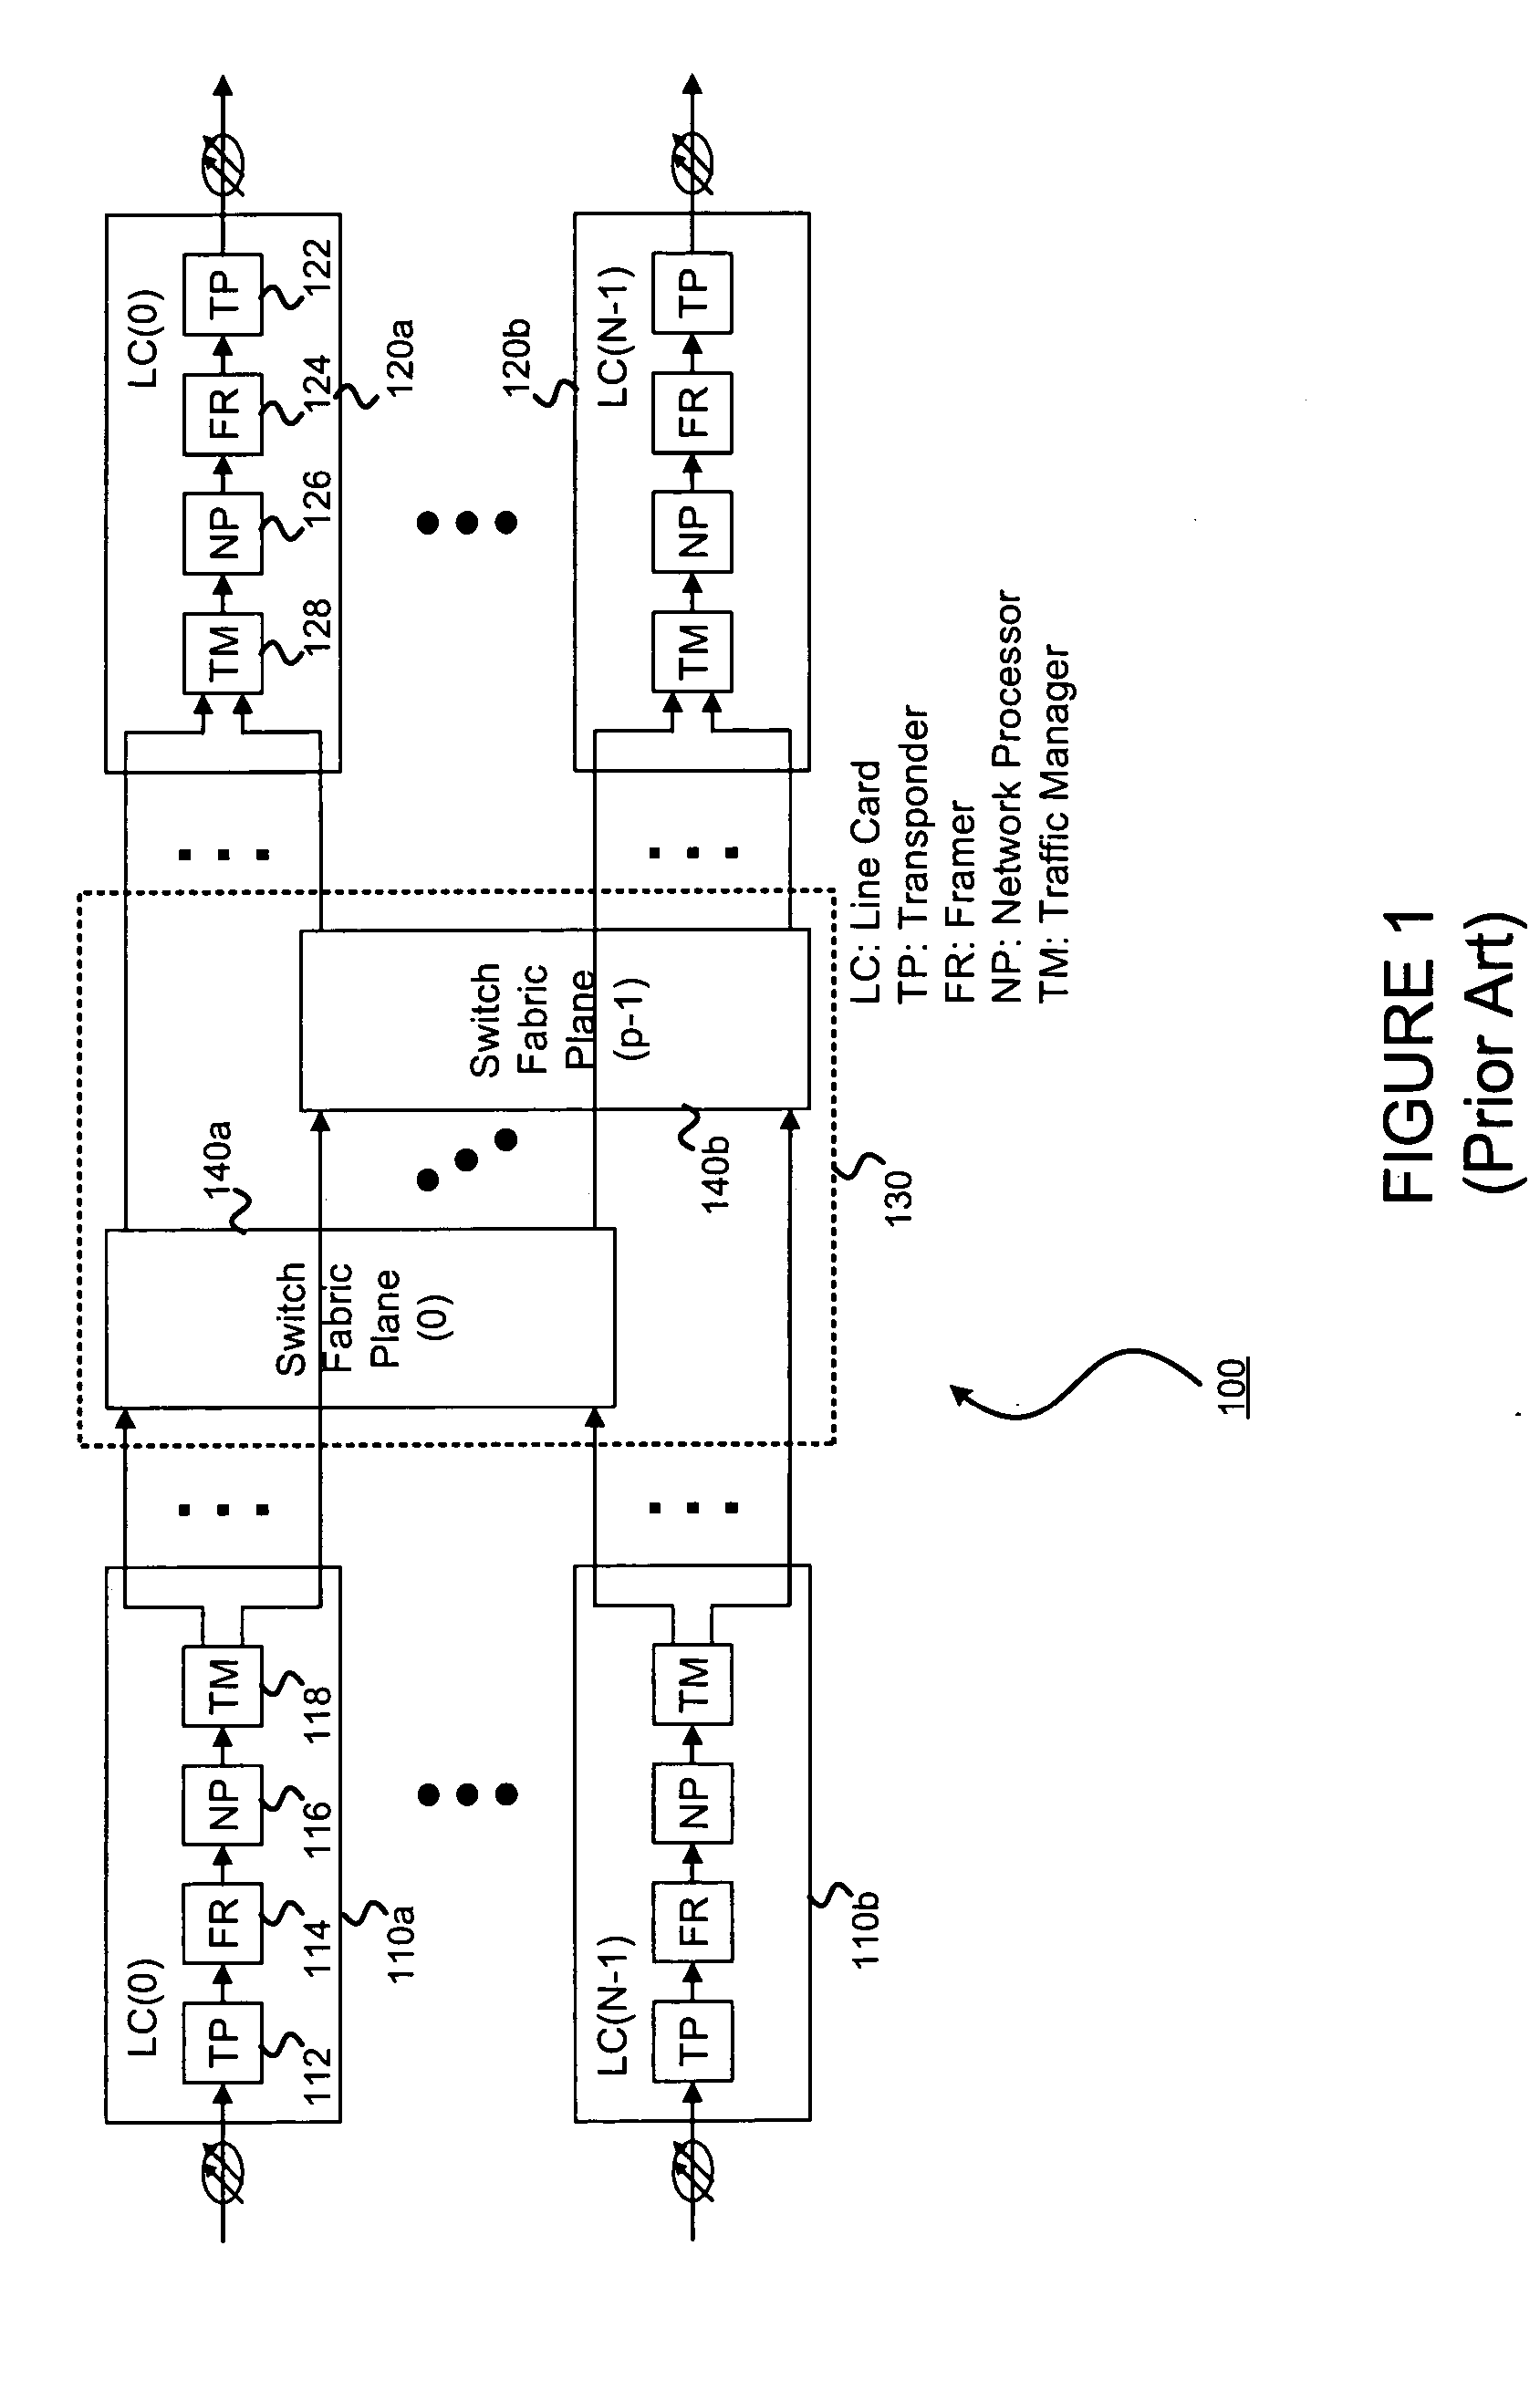 Packet reassembly and deadlock avoidance for use in a packet switch